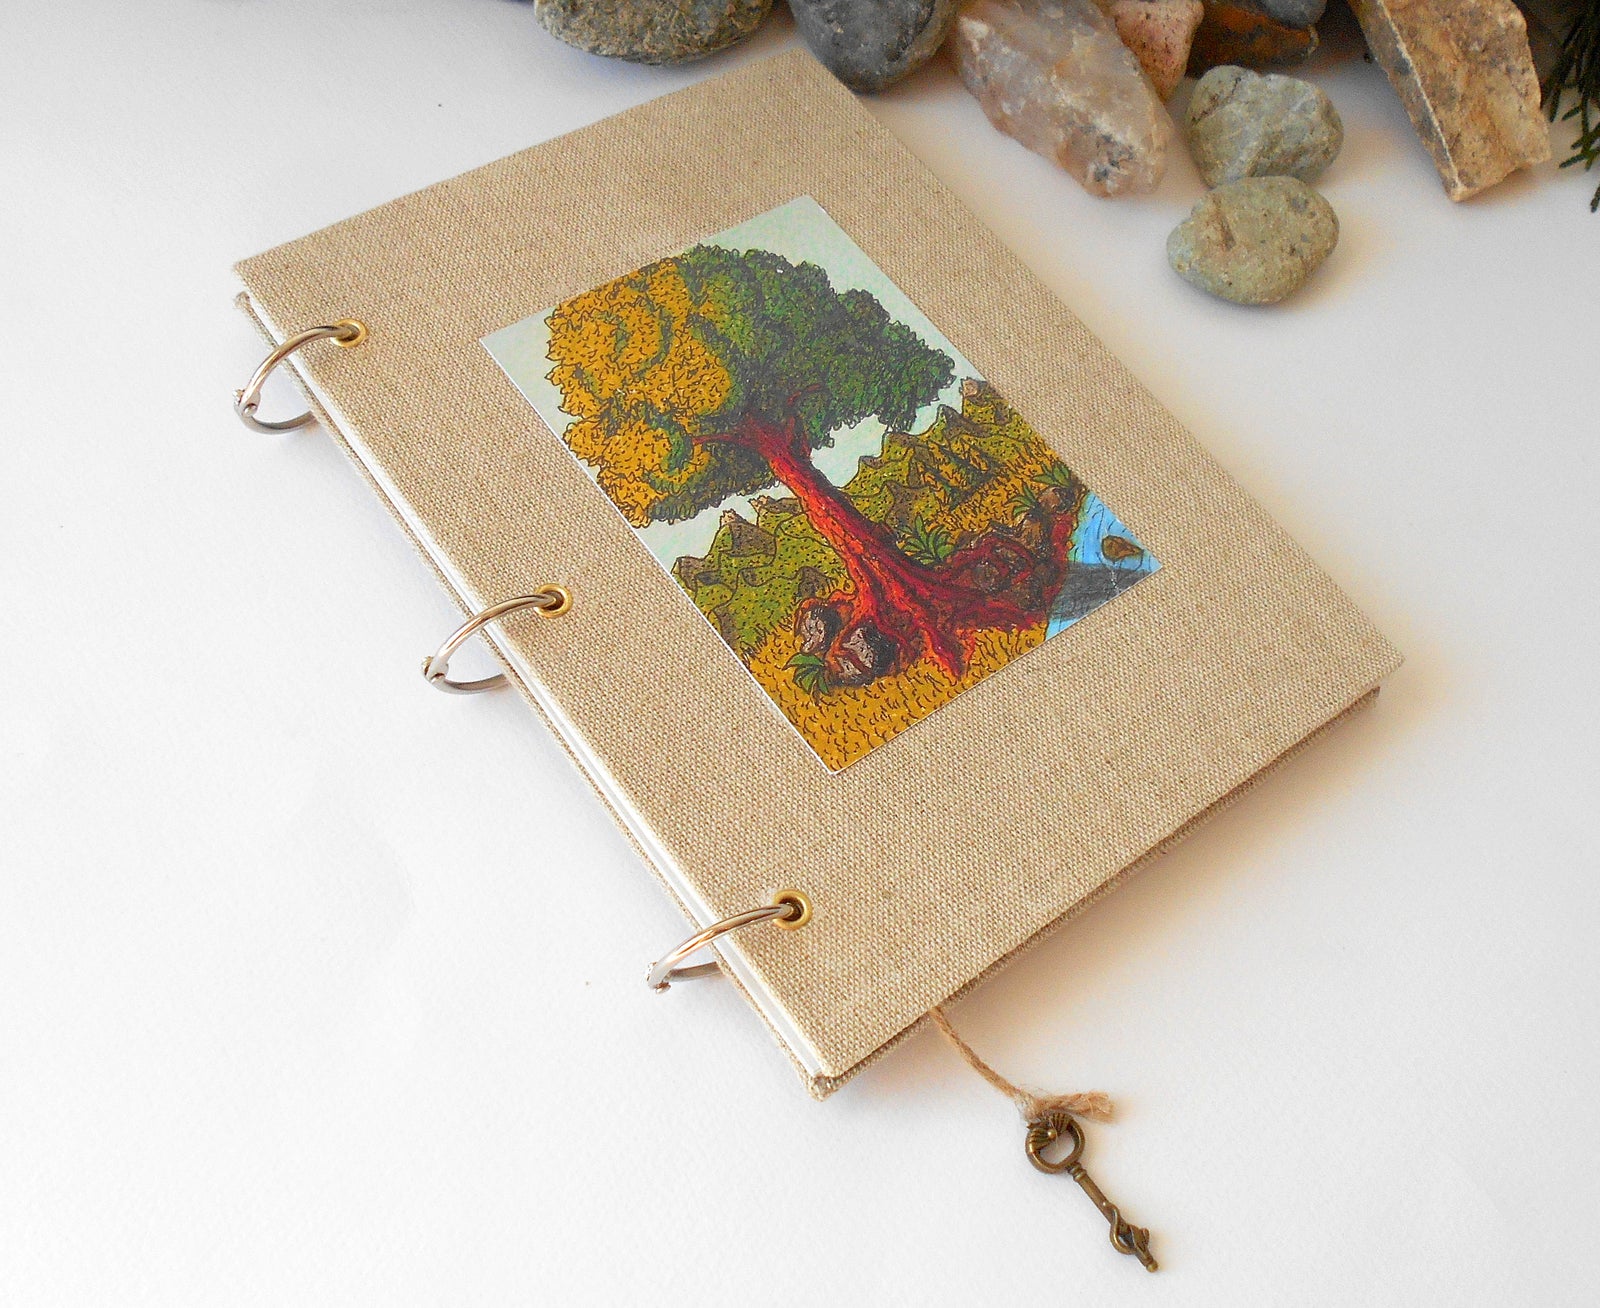 Handmade fabric sketchbook journal with a space fantasy art